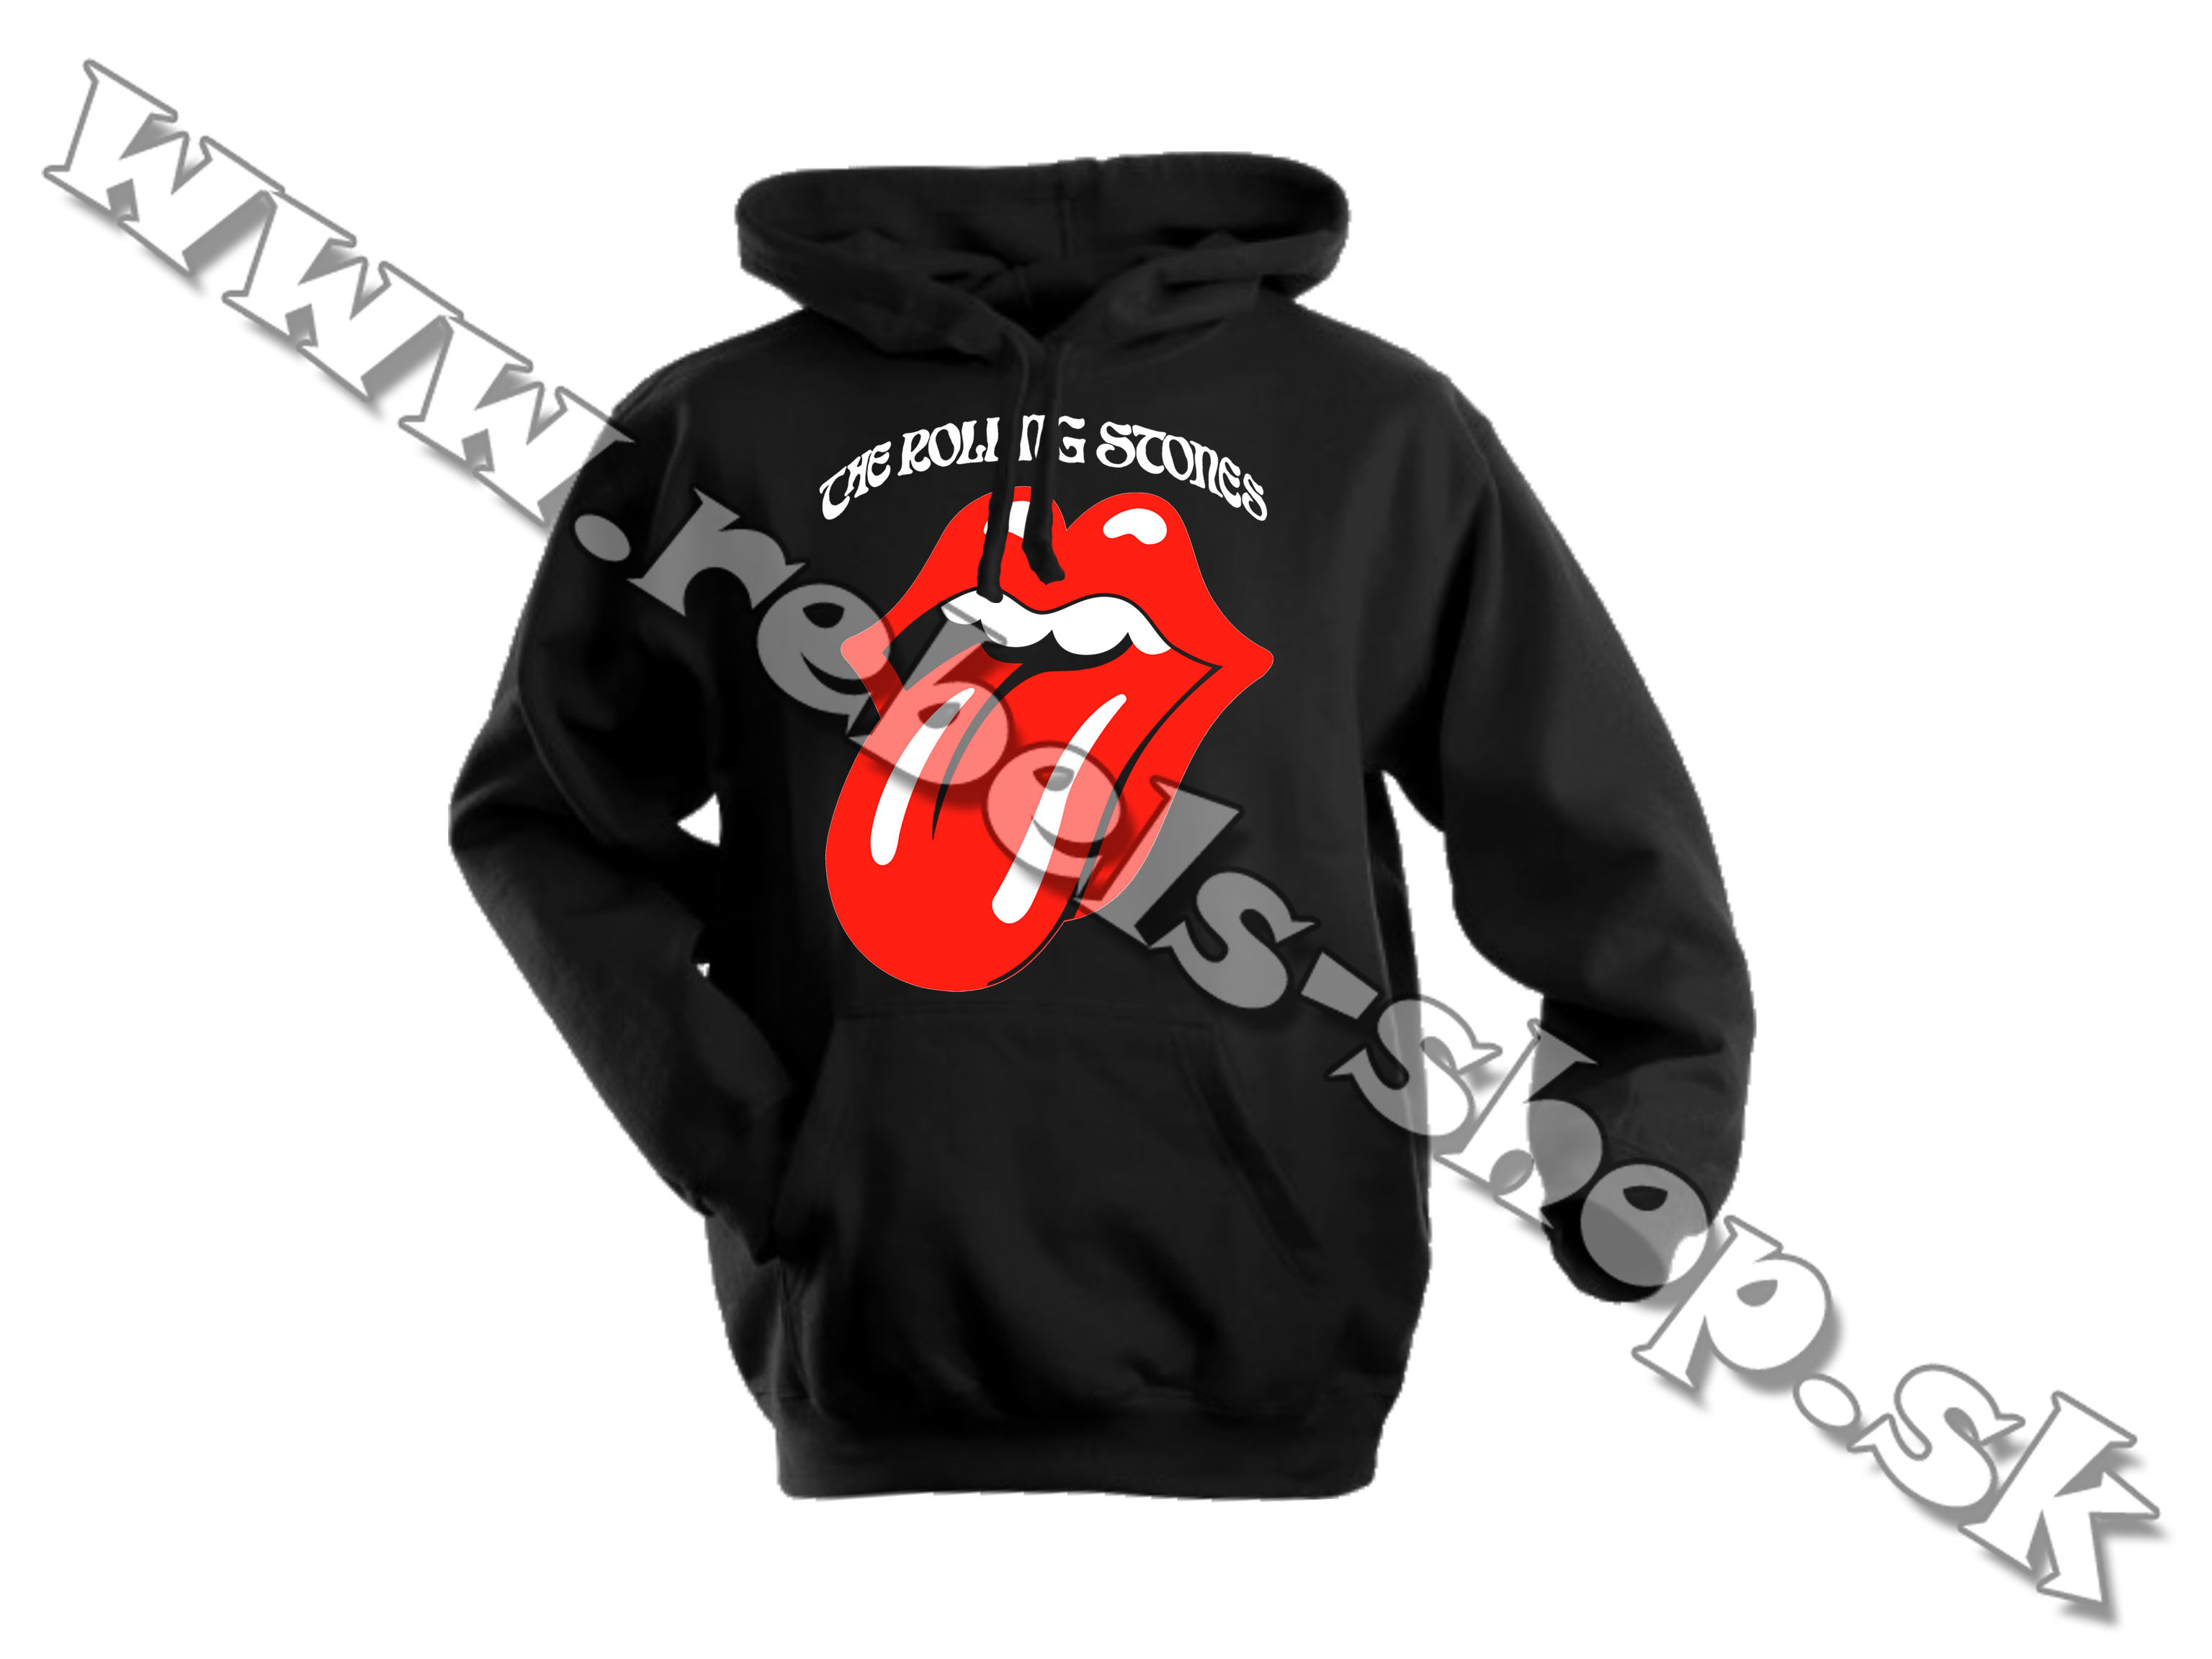 Mikina "The Rolling Stones"